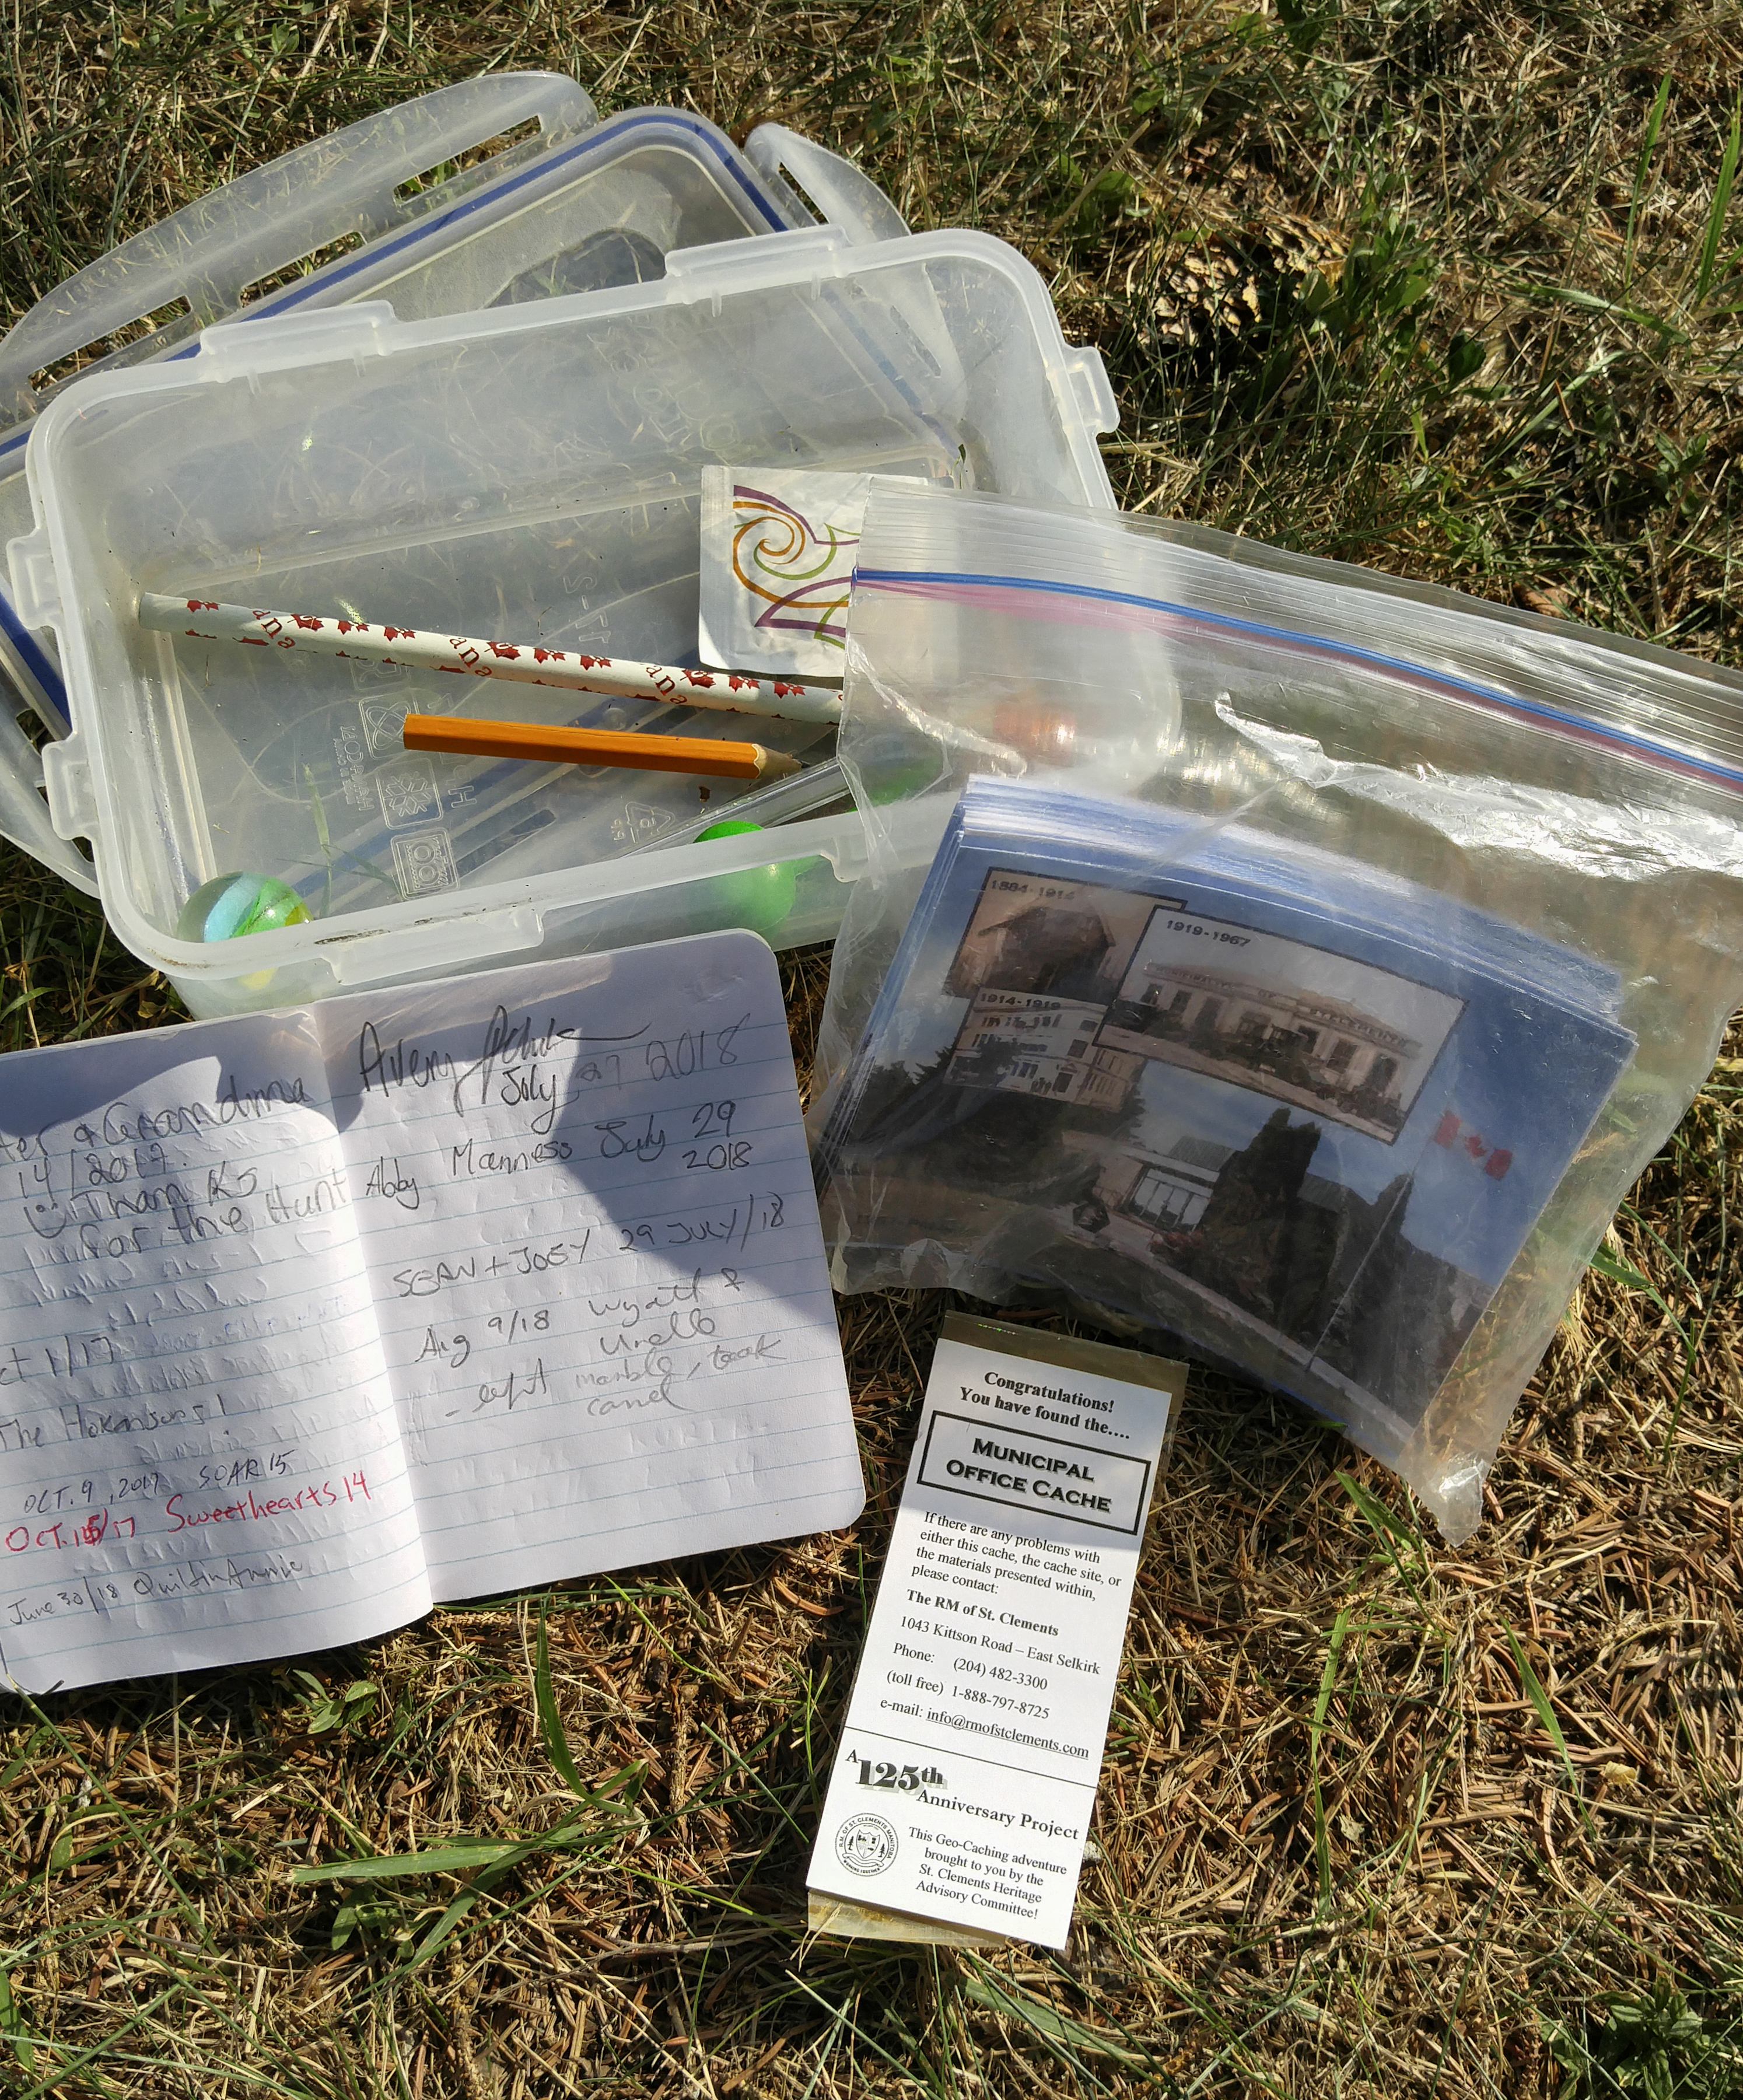 RM of St. Clements geocache package